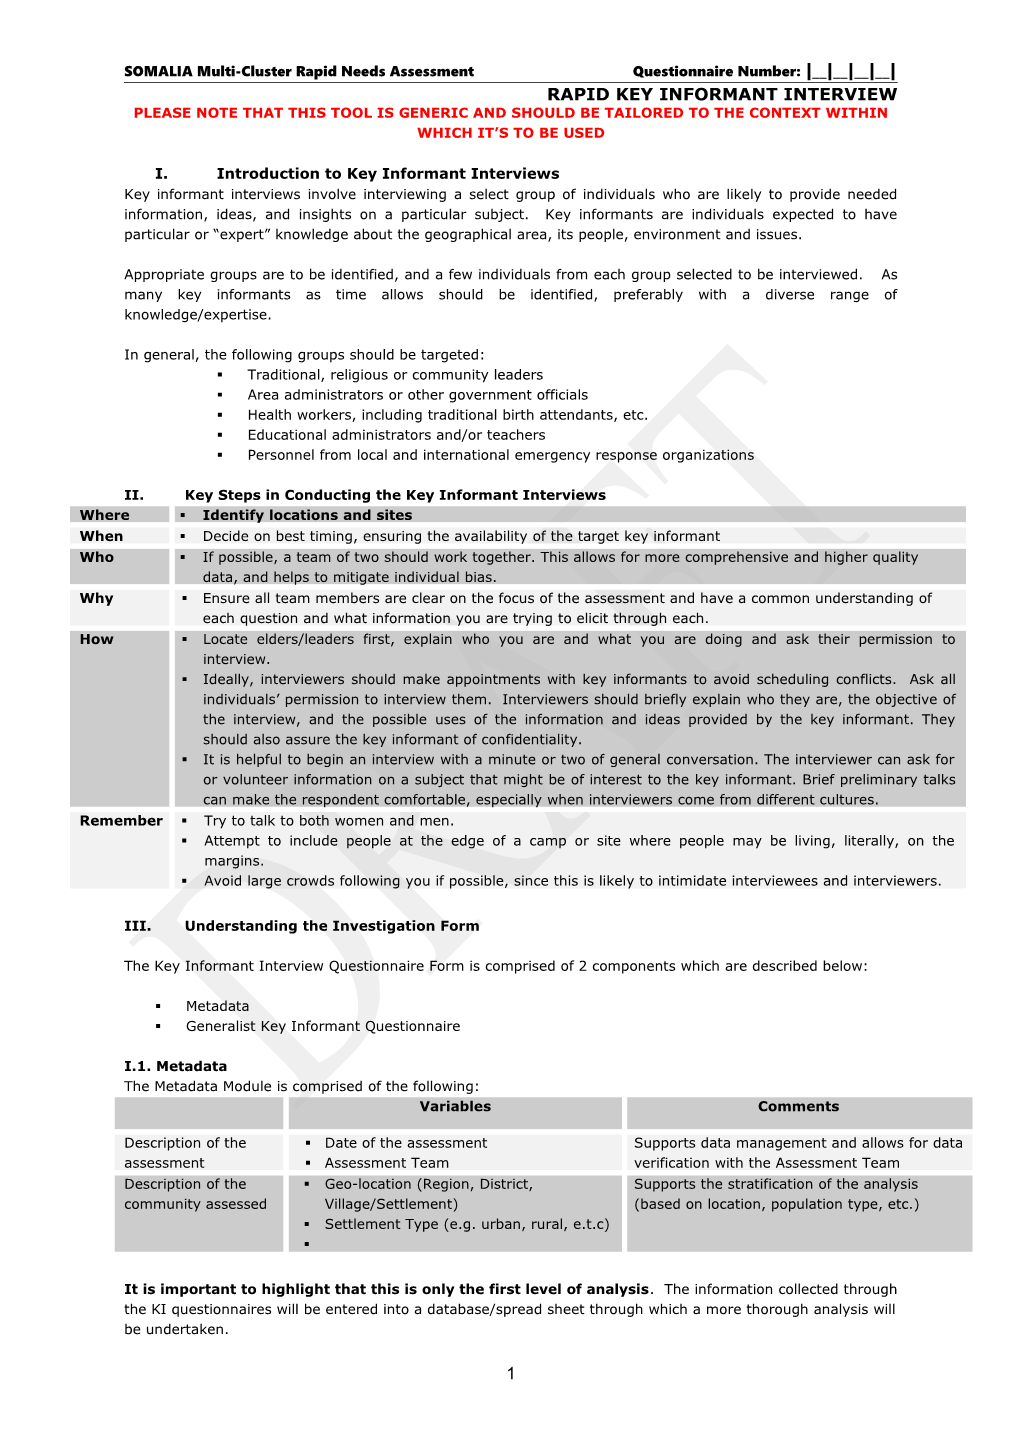 SOMALIA Multi-Cluster Rapid Needs Assessment Questionnaire Number: __ __ __ __